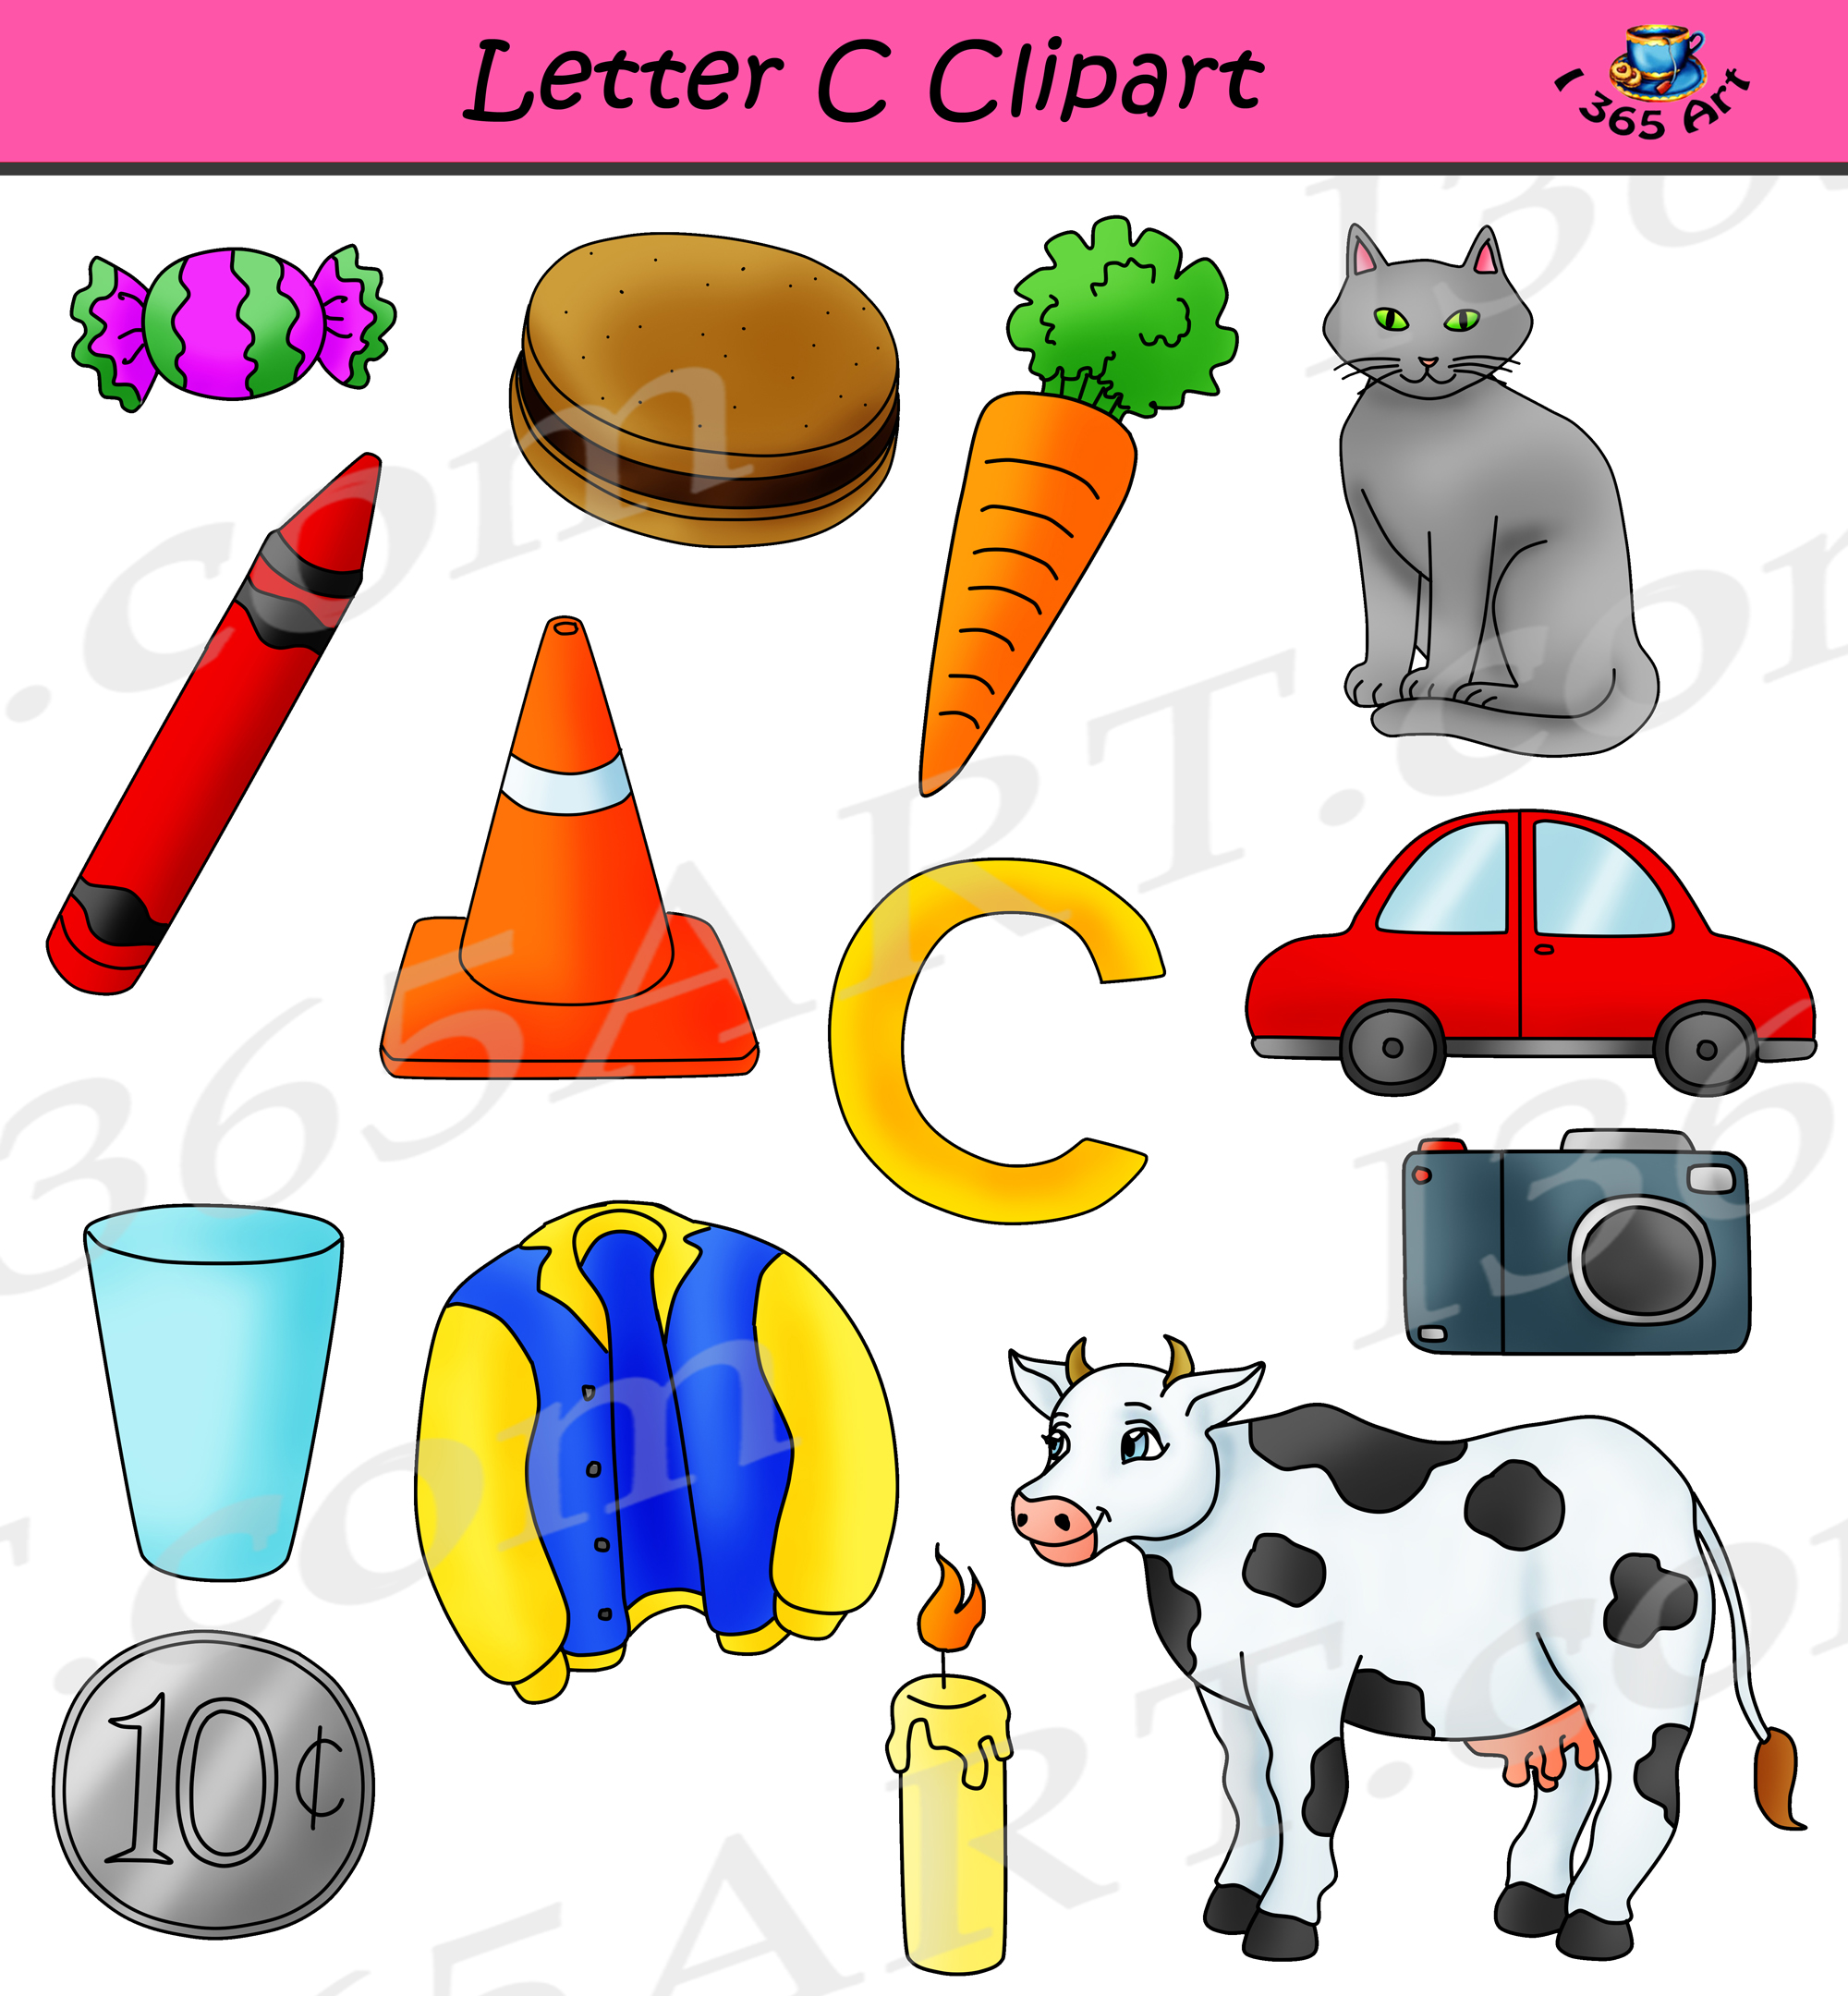 Letter C Clipart - Commercial-Use Graphics by Clipart 4 School